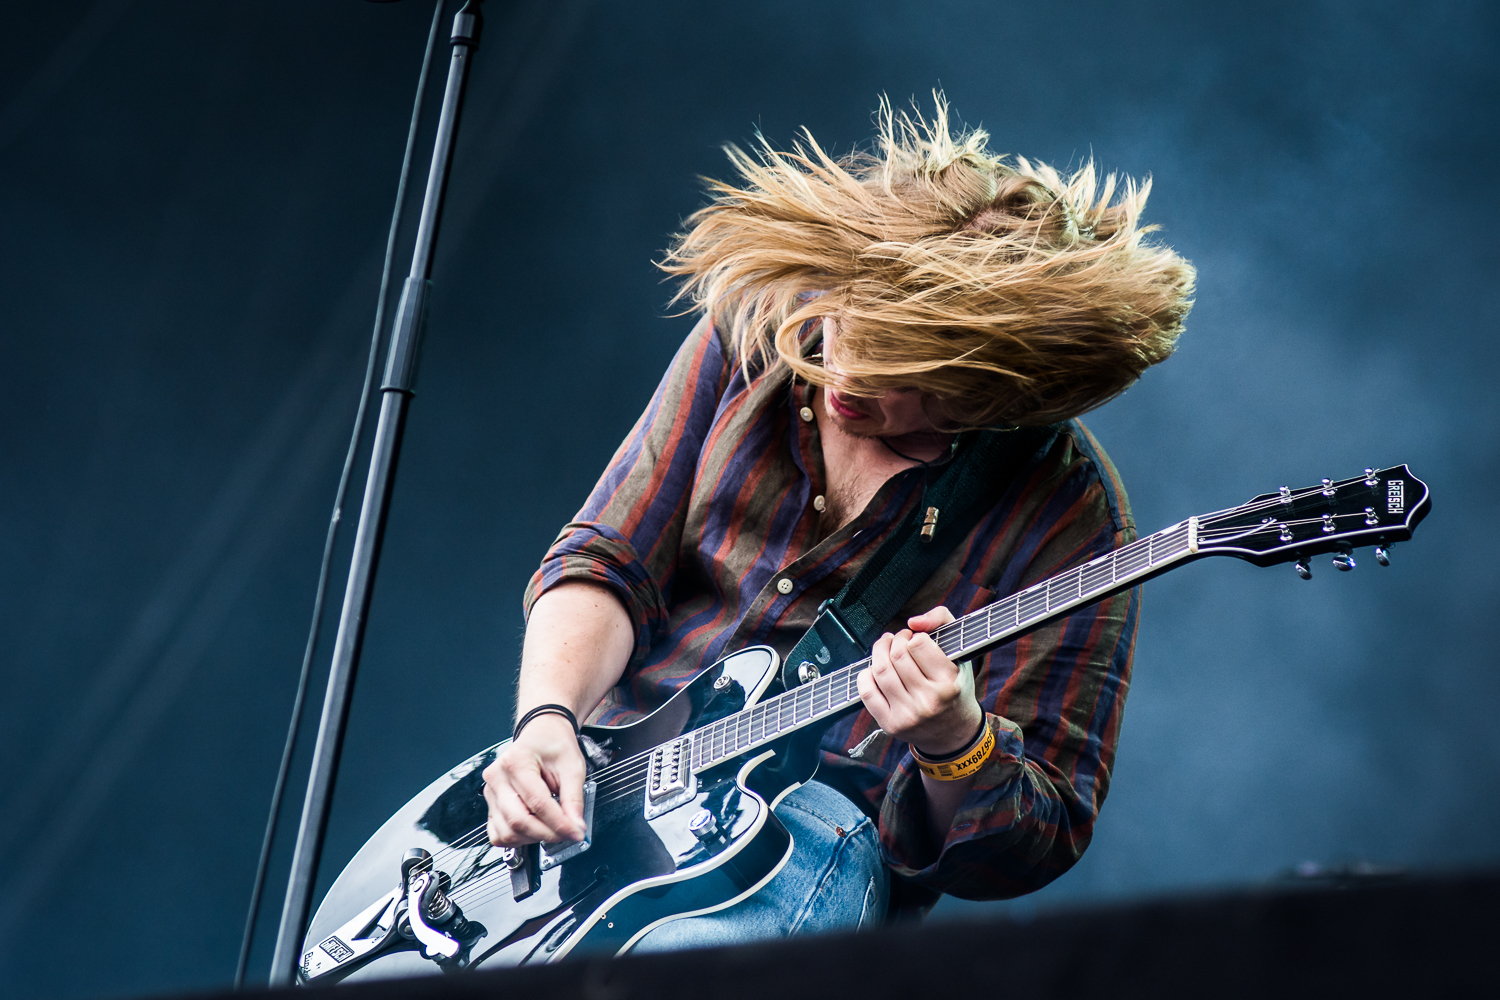 Nothing But Thieves @ Rock Werchter (© 2017 Timmy Haubrechts)